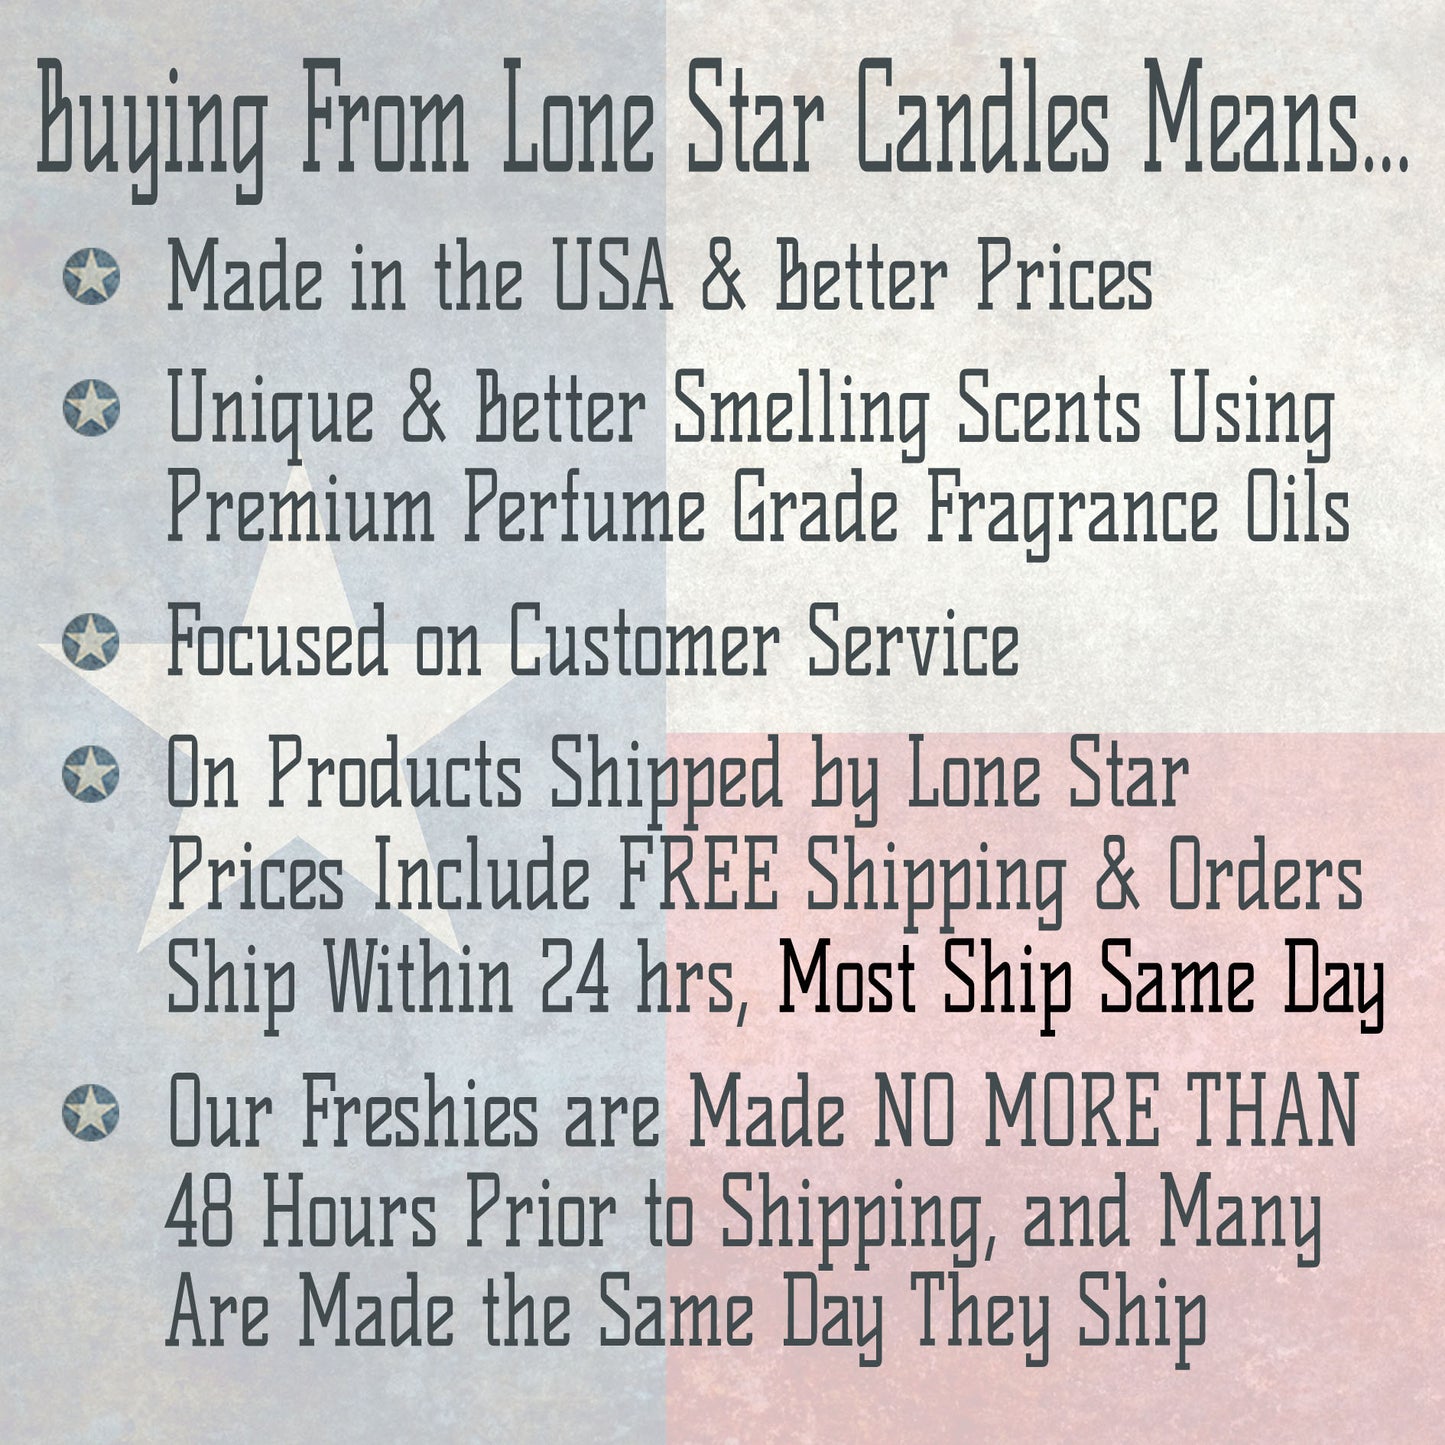 Cranberries & Sandalwood, Lone Star Candles & More's Premium Strongly Scented Freshies, A Delightful Mix of Spiced Cranberry, & Sandalwood, Car & Air Freshener, USA Made in TX, Christmas Tree 1-Pack